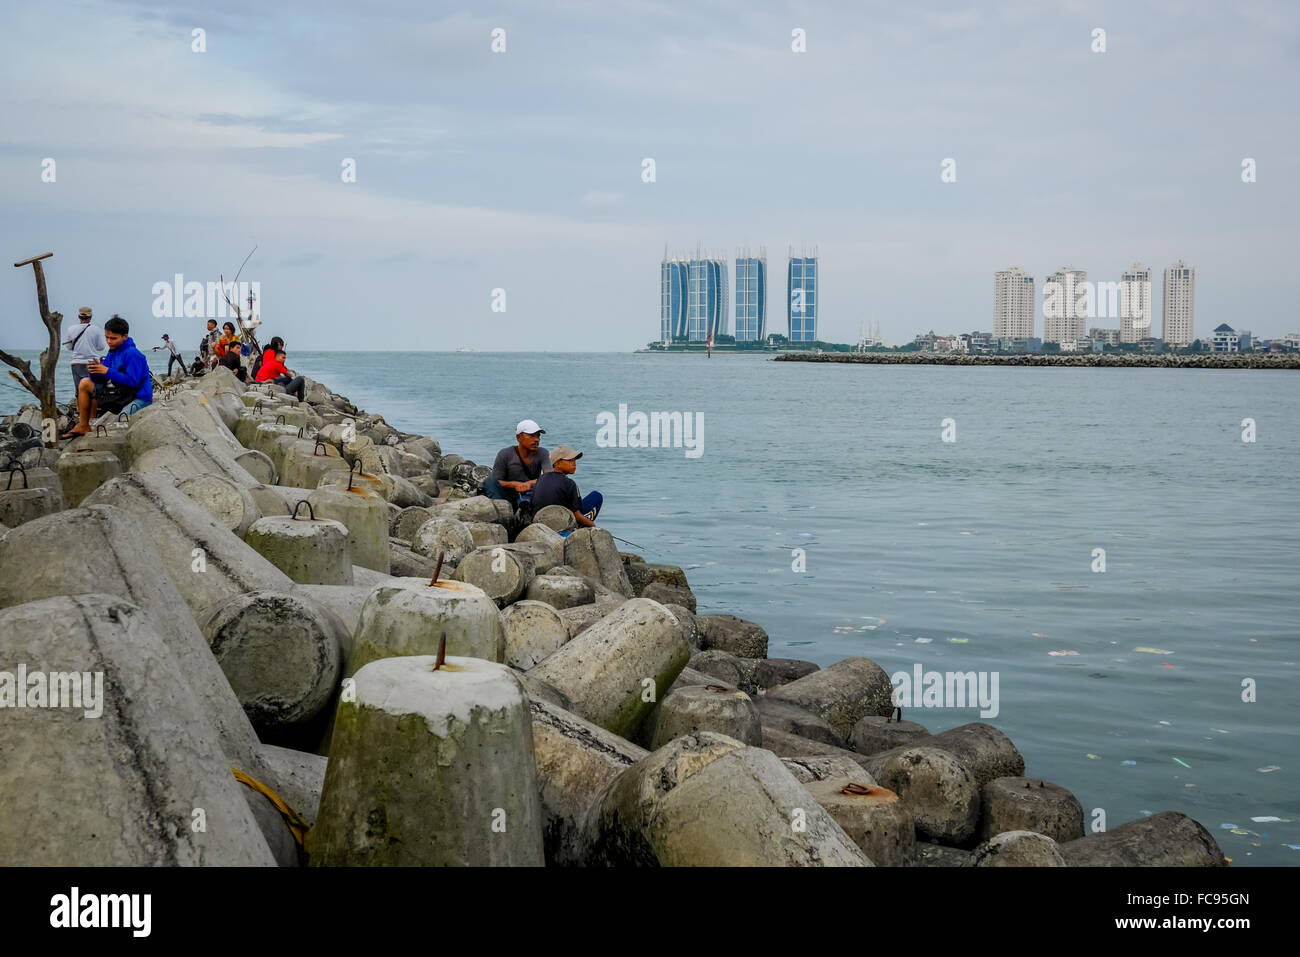 Local people spending a free time with fishing activity at tetrapod wave barriers in Jakarta, Indonesia. Stock Photo